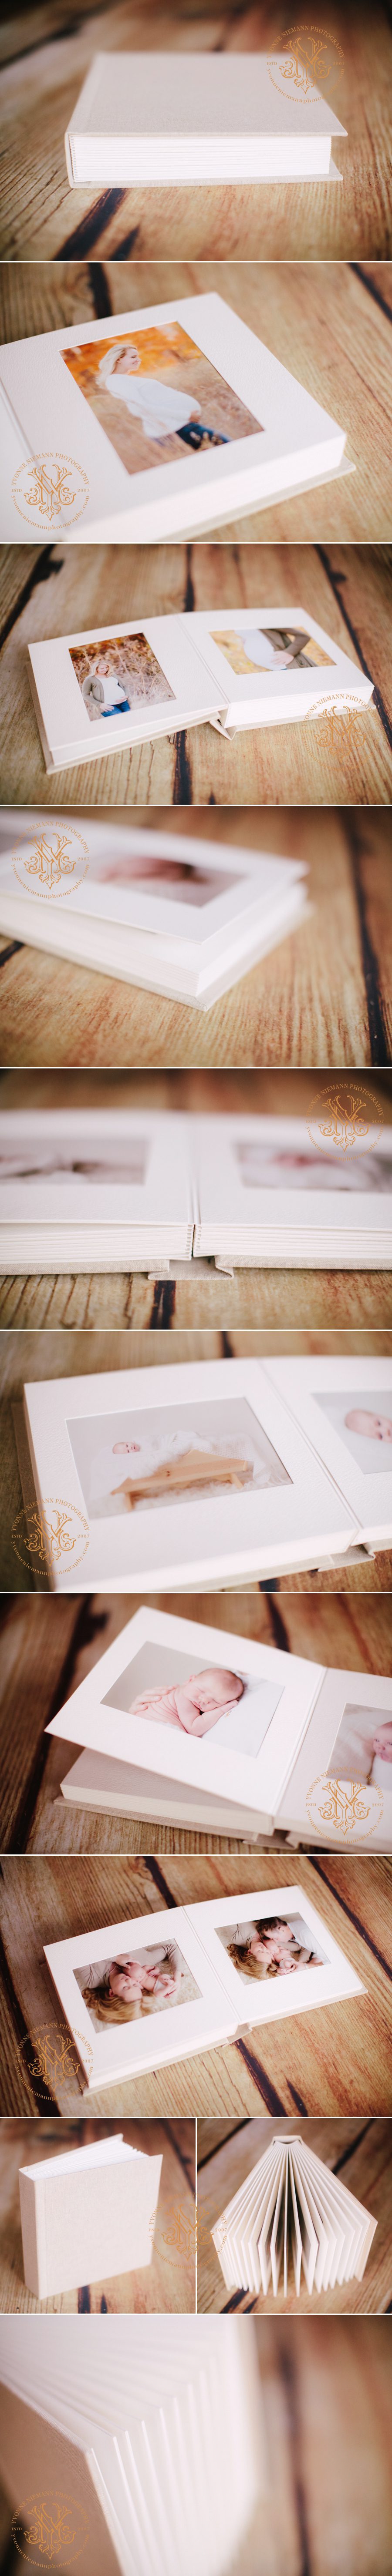 Maternity and newborn matted album offered by St. Louis Family Photographer, Yvonne Niemann.